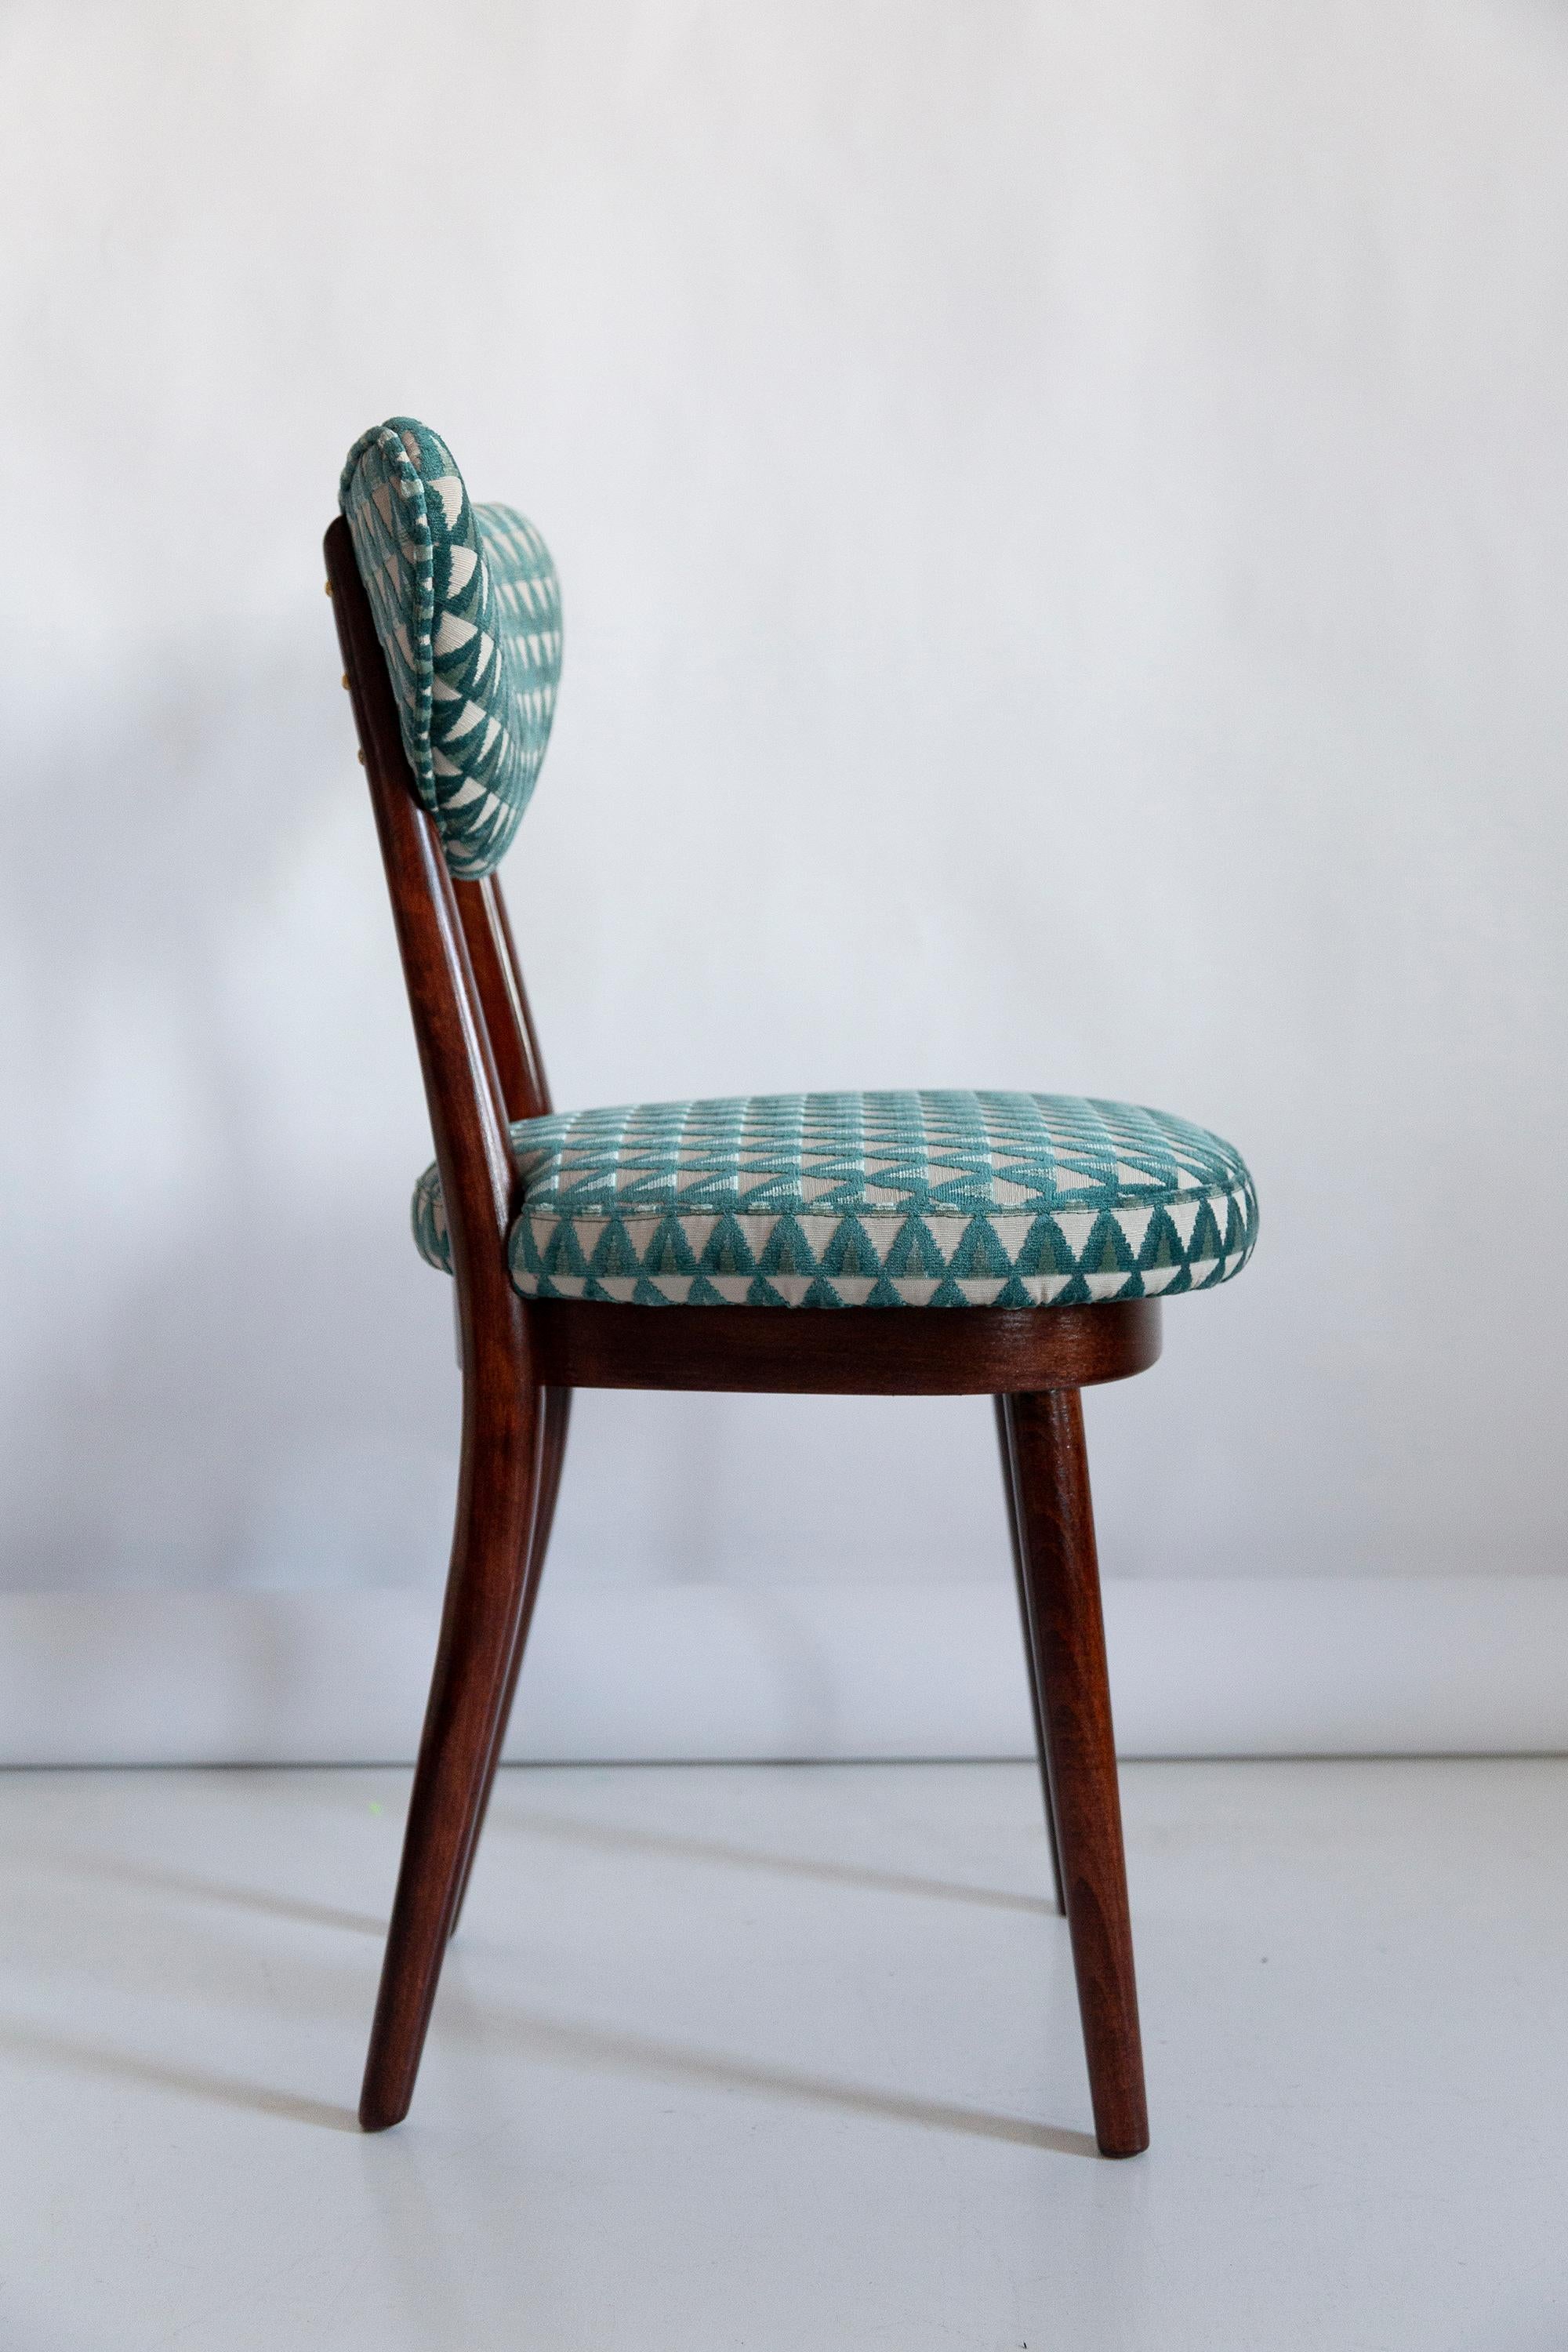 Set of Six Mid-Century Heart Chairs in Amuleto Green Velvet, Europe, 1960s For Sale 2